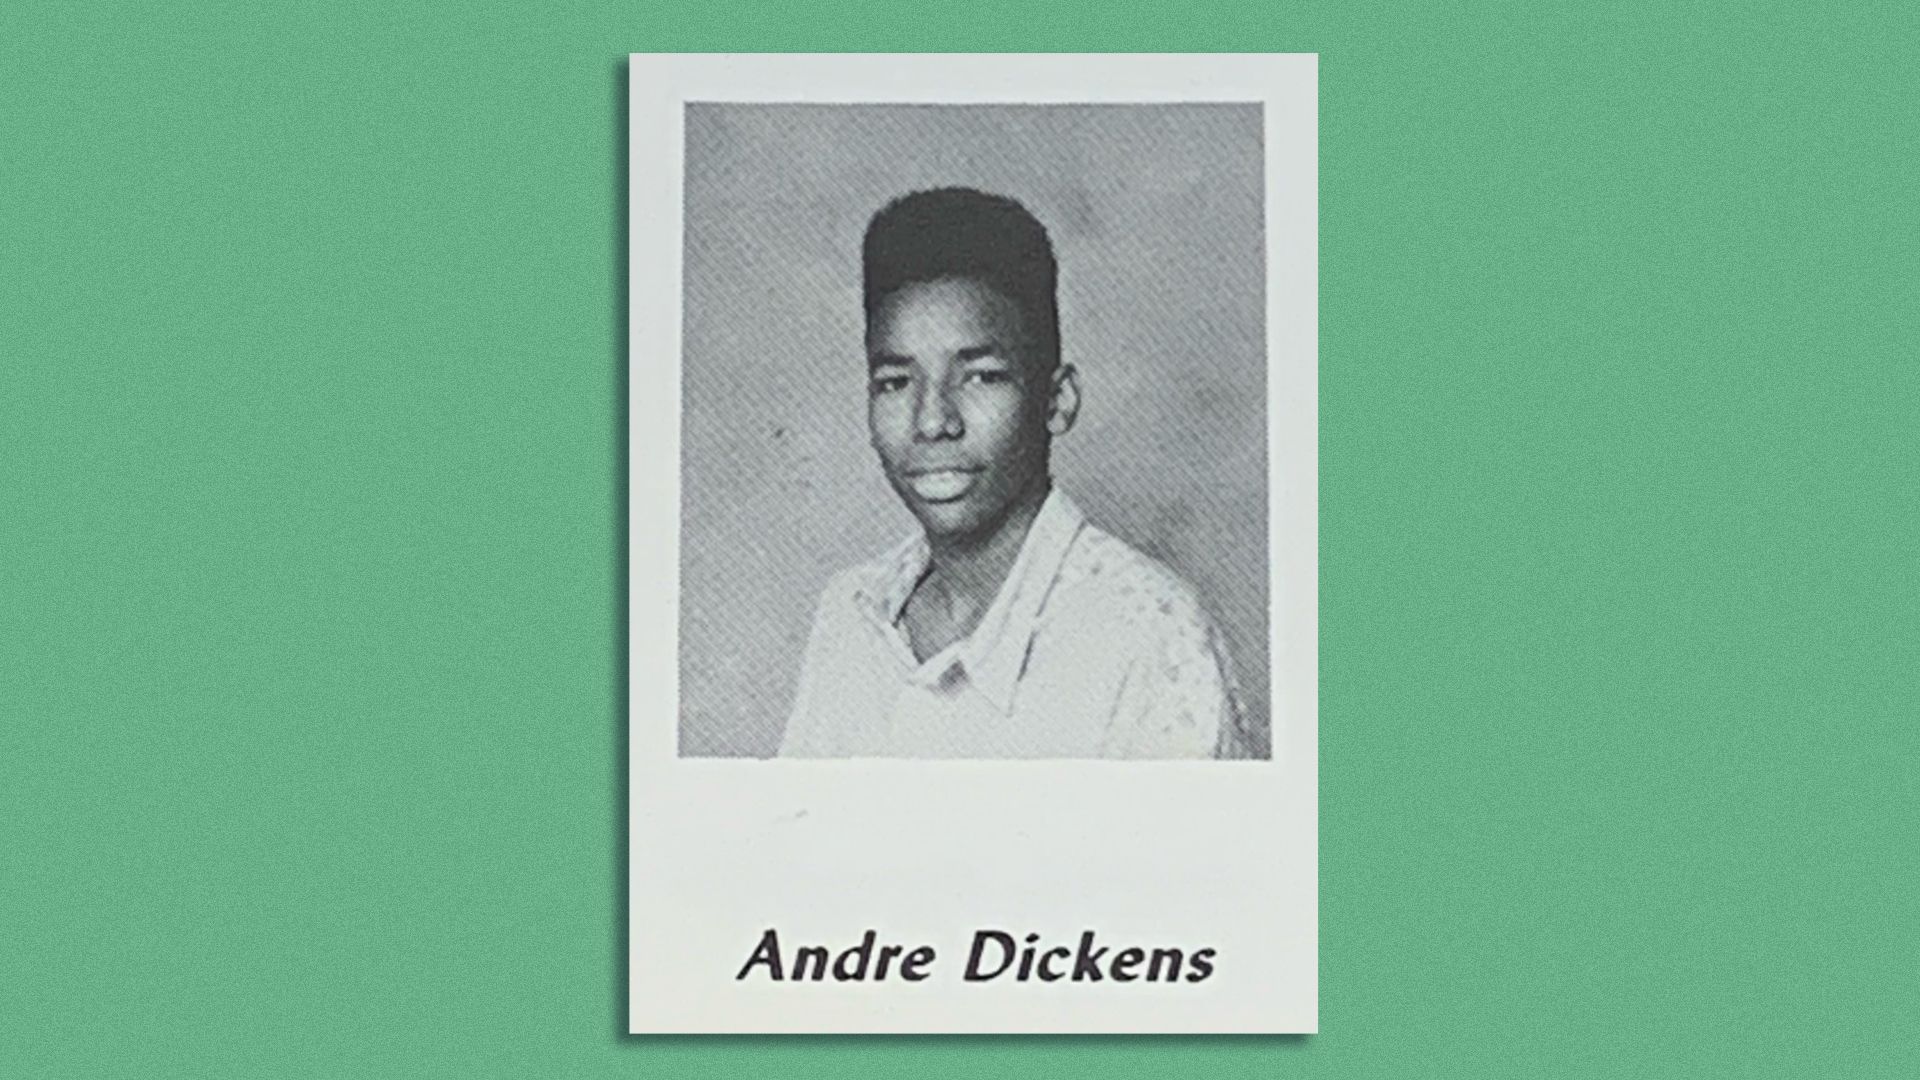 A high school portrait of Andre Dickens from the yearbook of Benjamin Mays High School